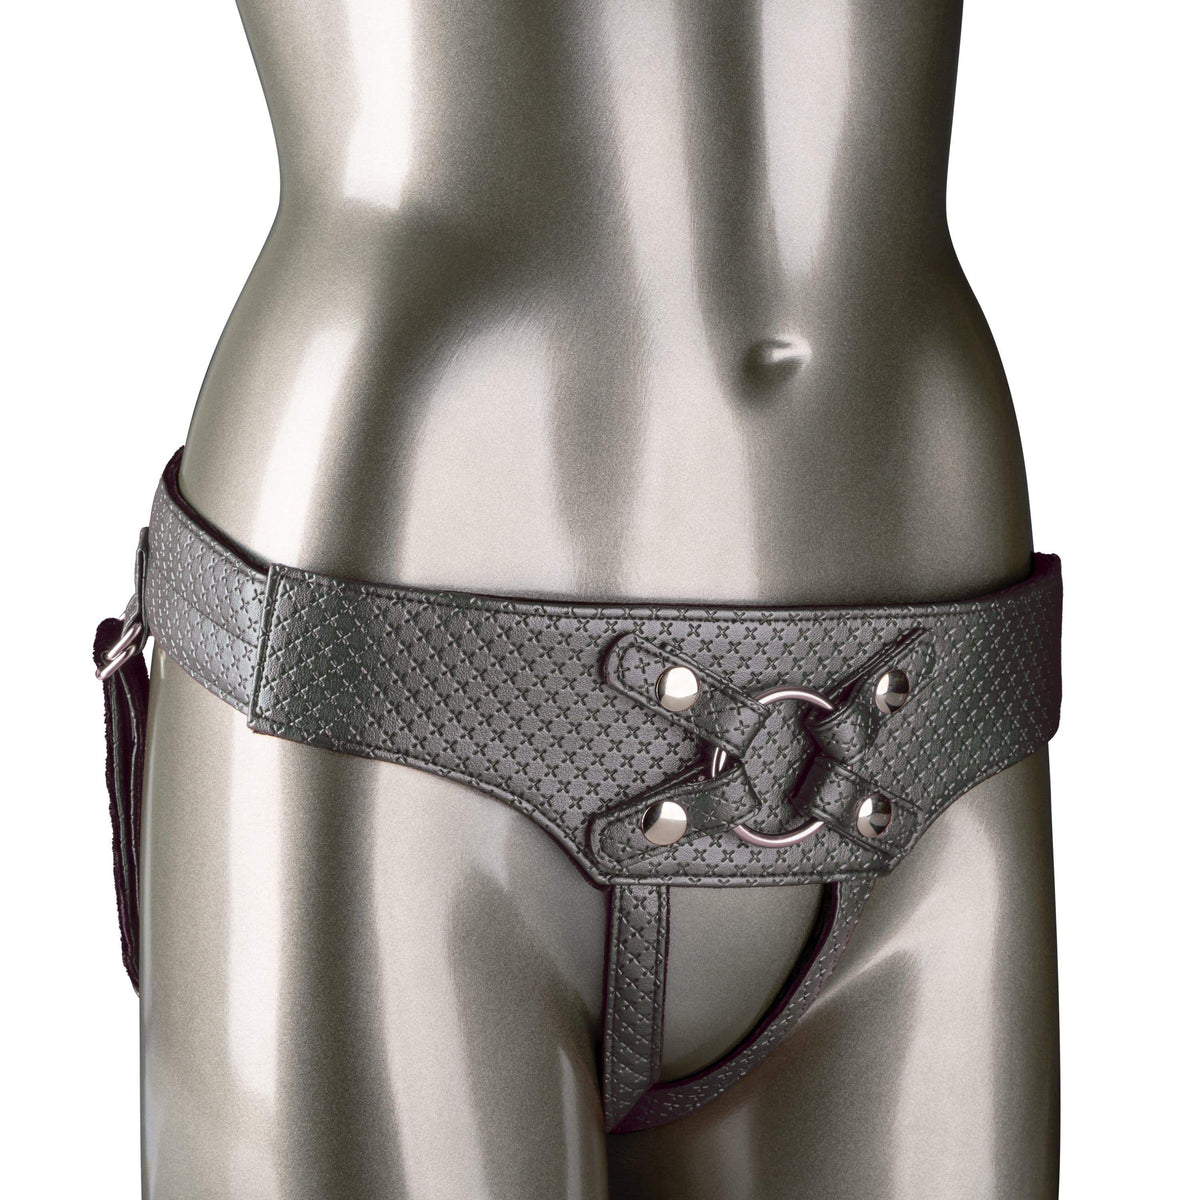 California Exotics - Her Royal Harness The Regal Empress Crotchless Strap On CE1760 CherryAffairs